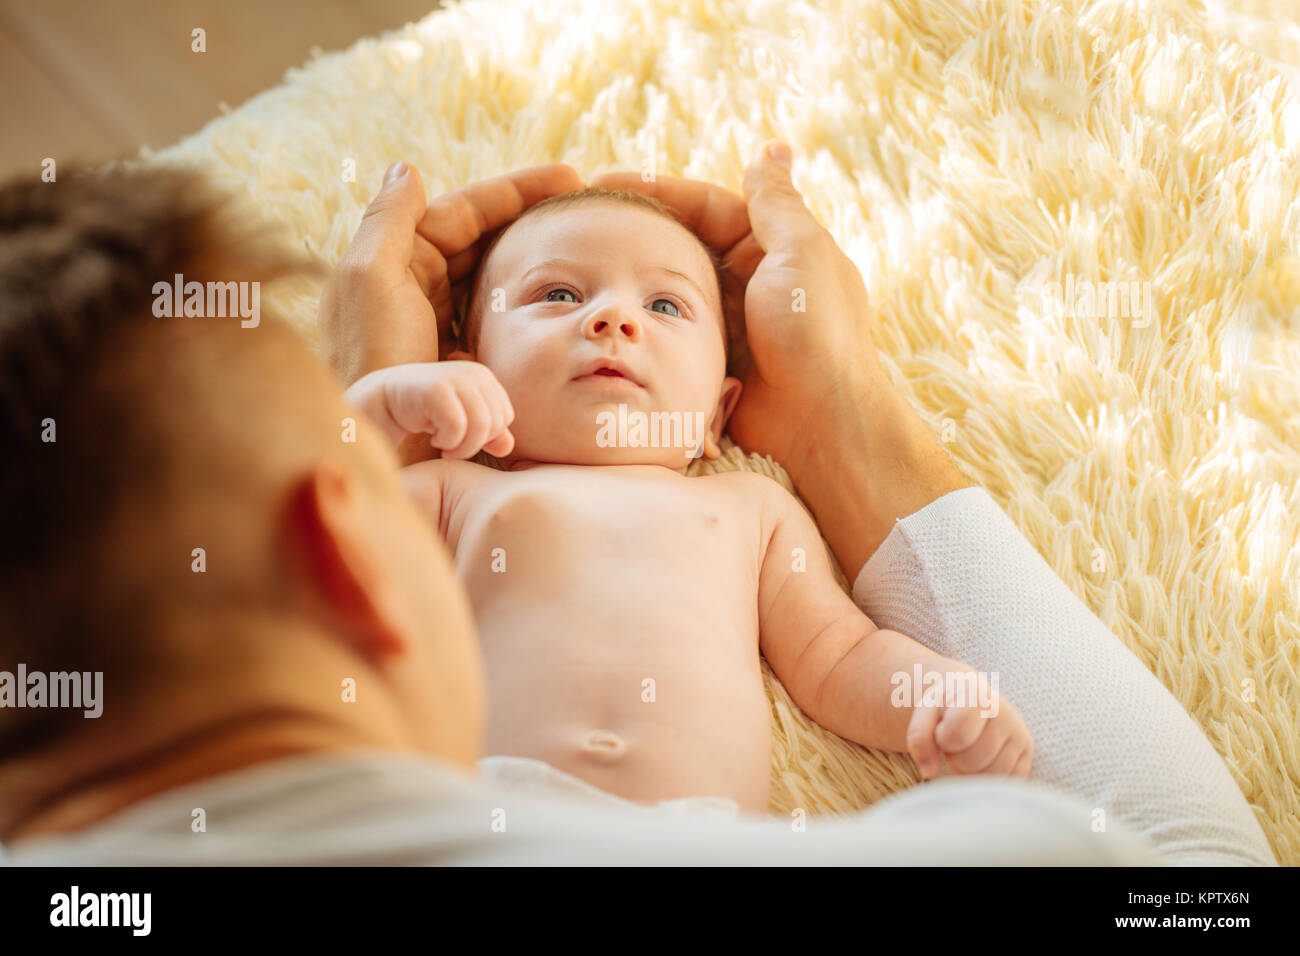 Baby looking at camera, jeter sur couverture blanche Banque D'Images